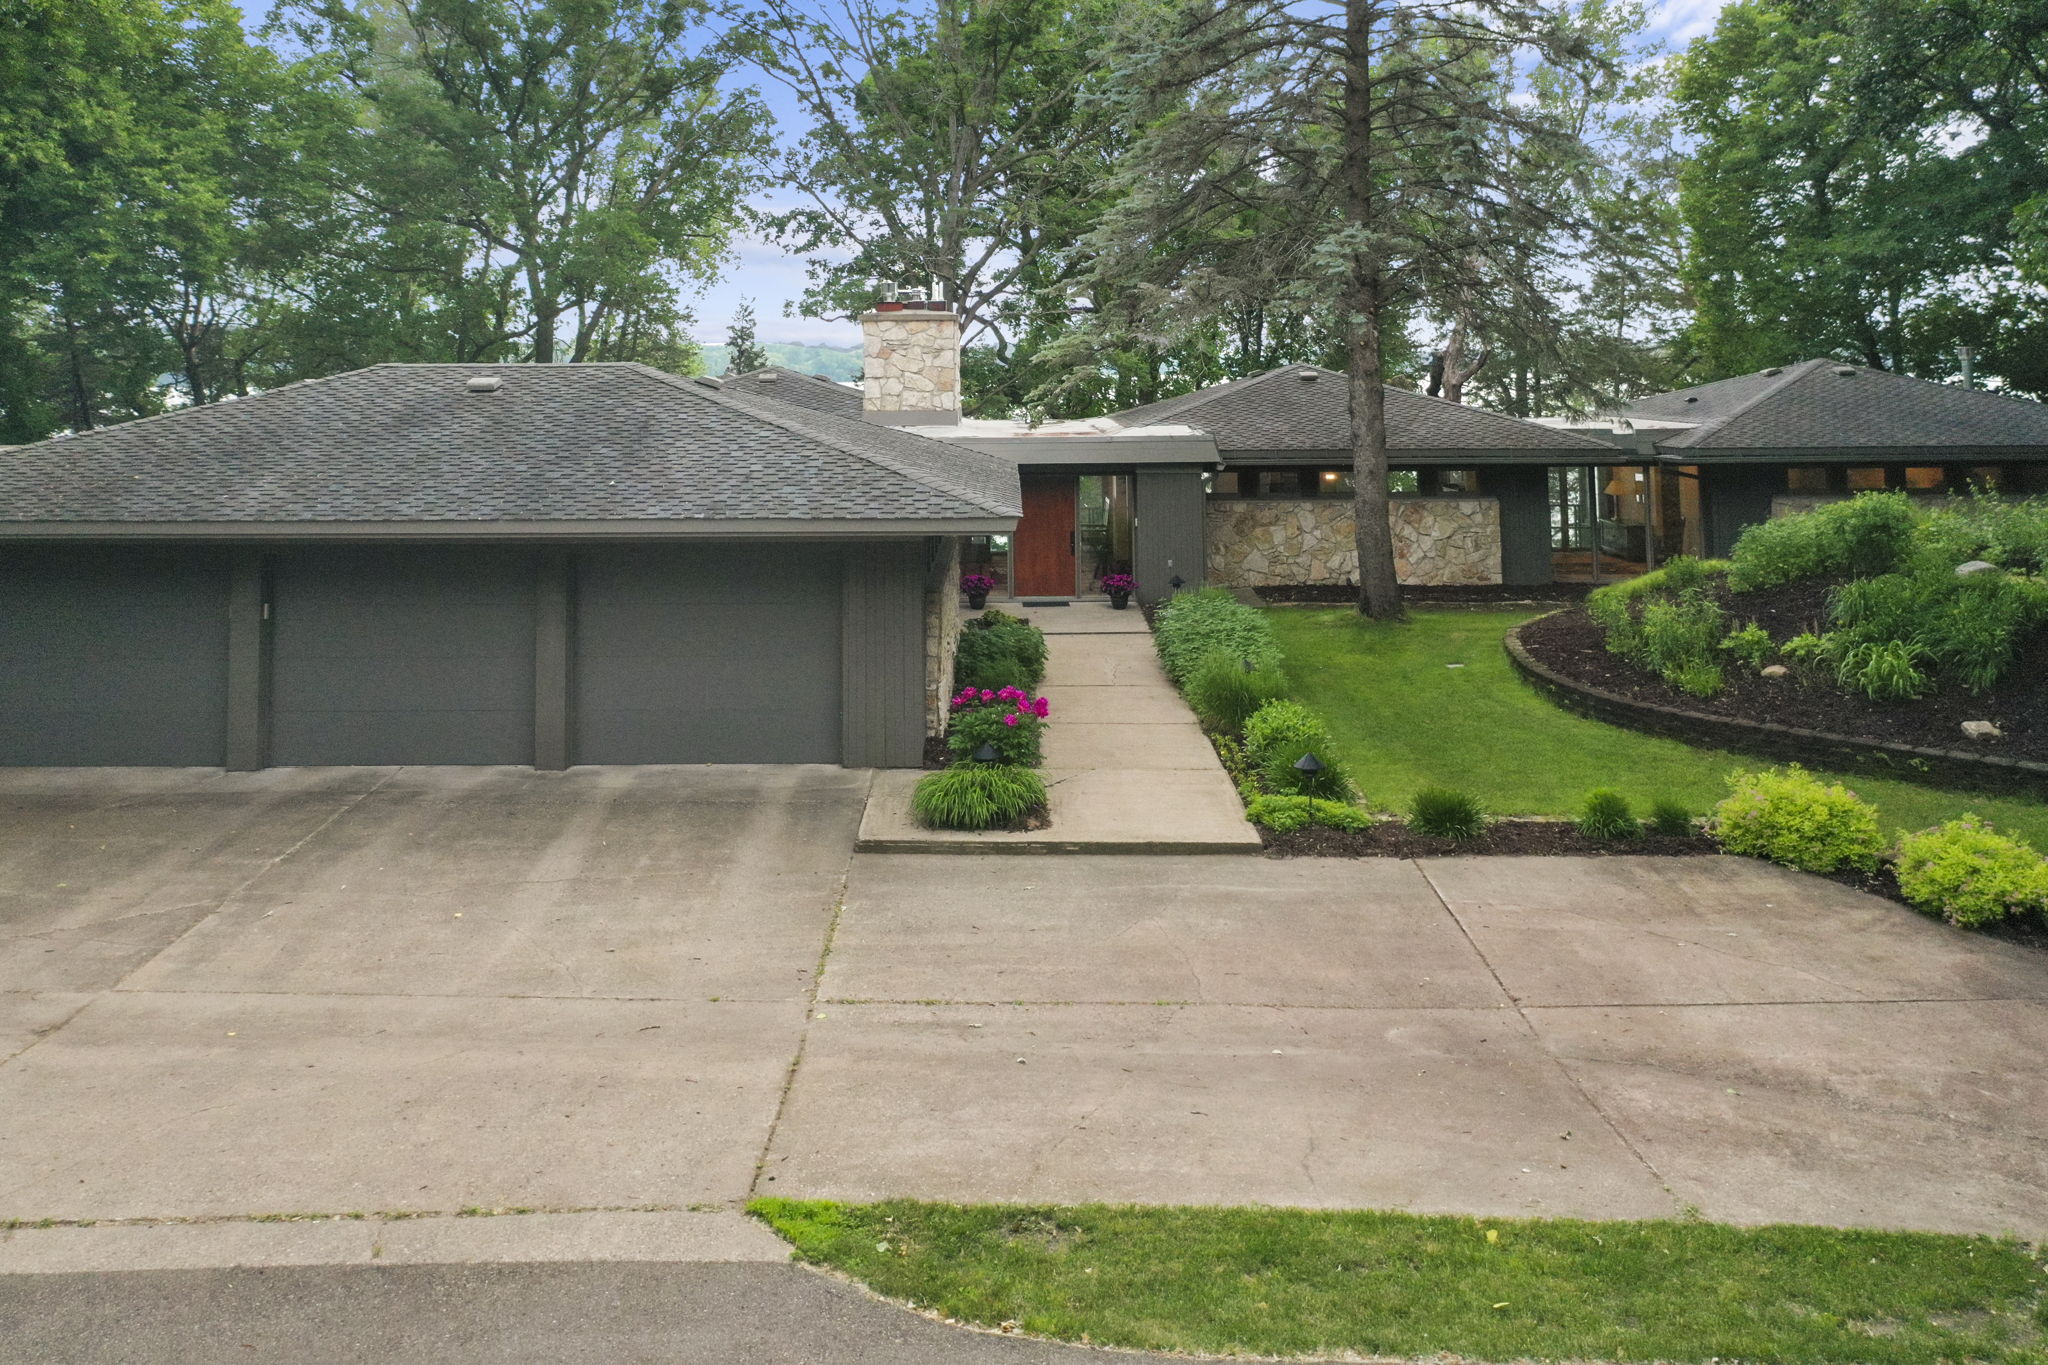  20 Red Fox Rd, North Oaks, MN 55127, US